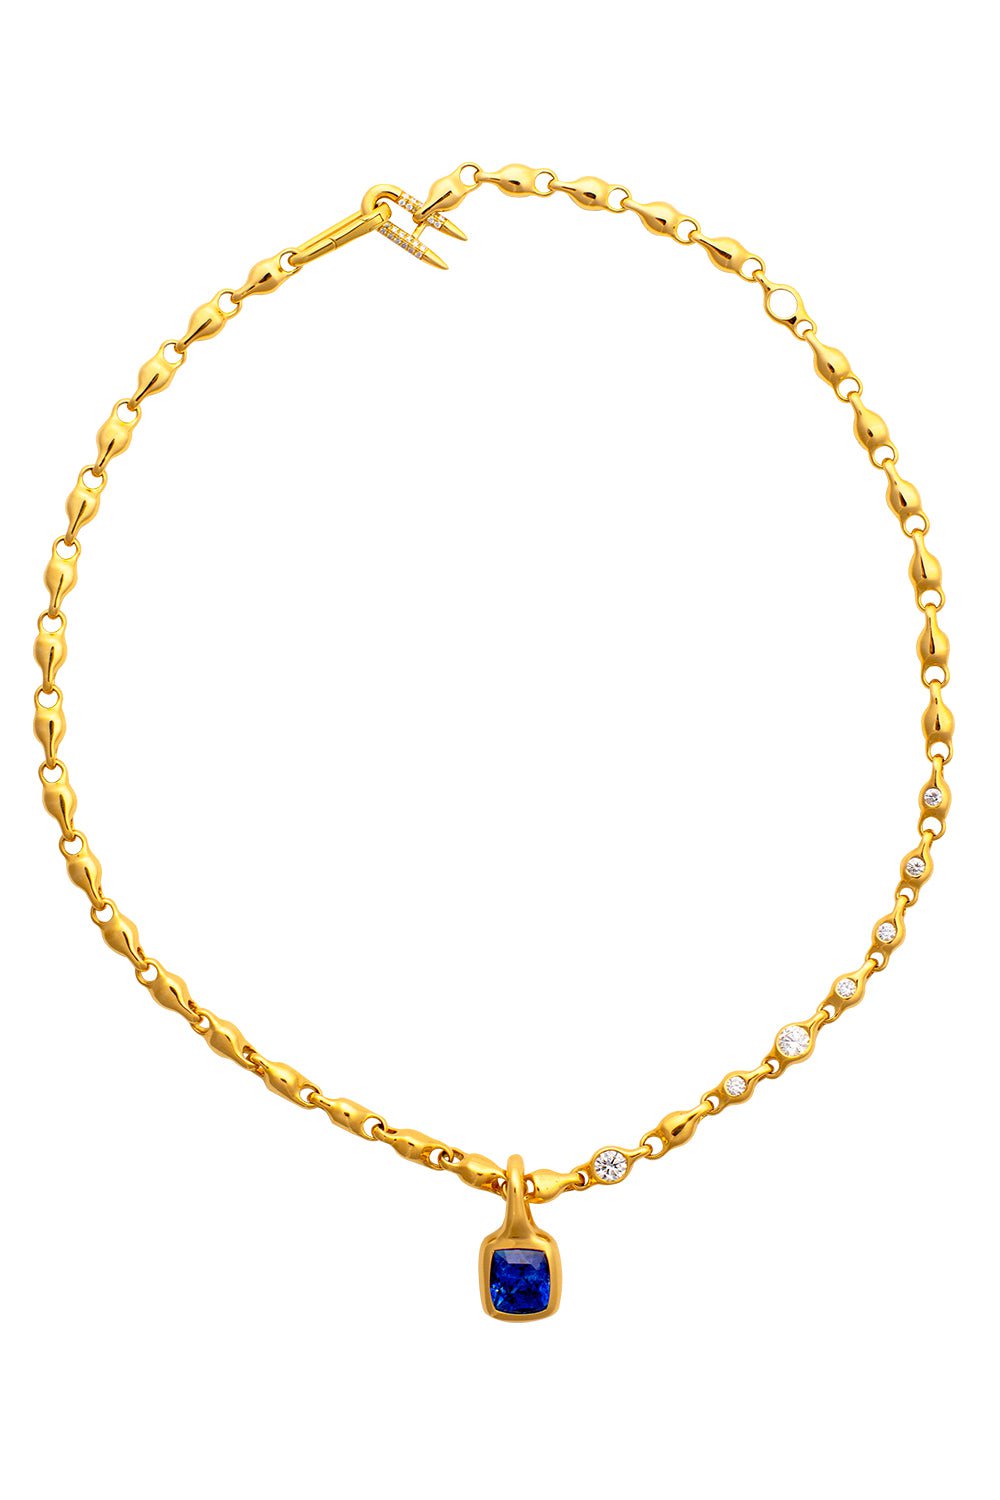 UNIFORM OBJECT-Blue Sapphire Reflection Chain + Carriage-YELLOW GOLD